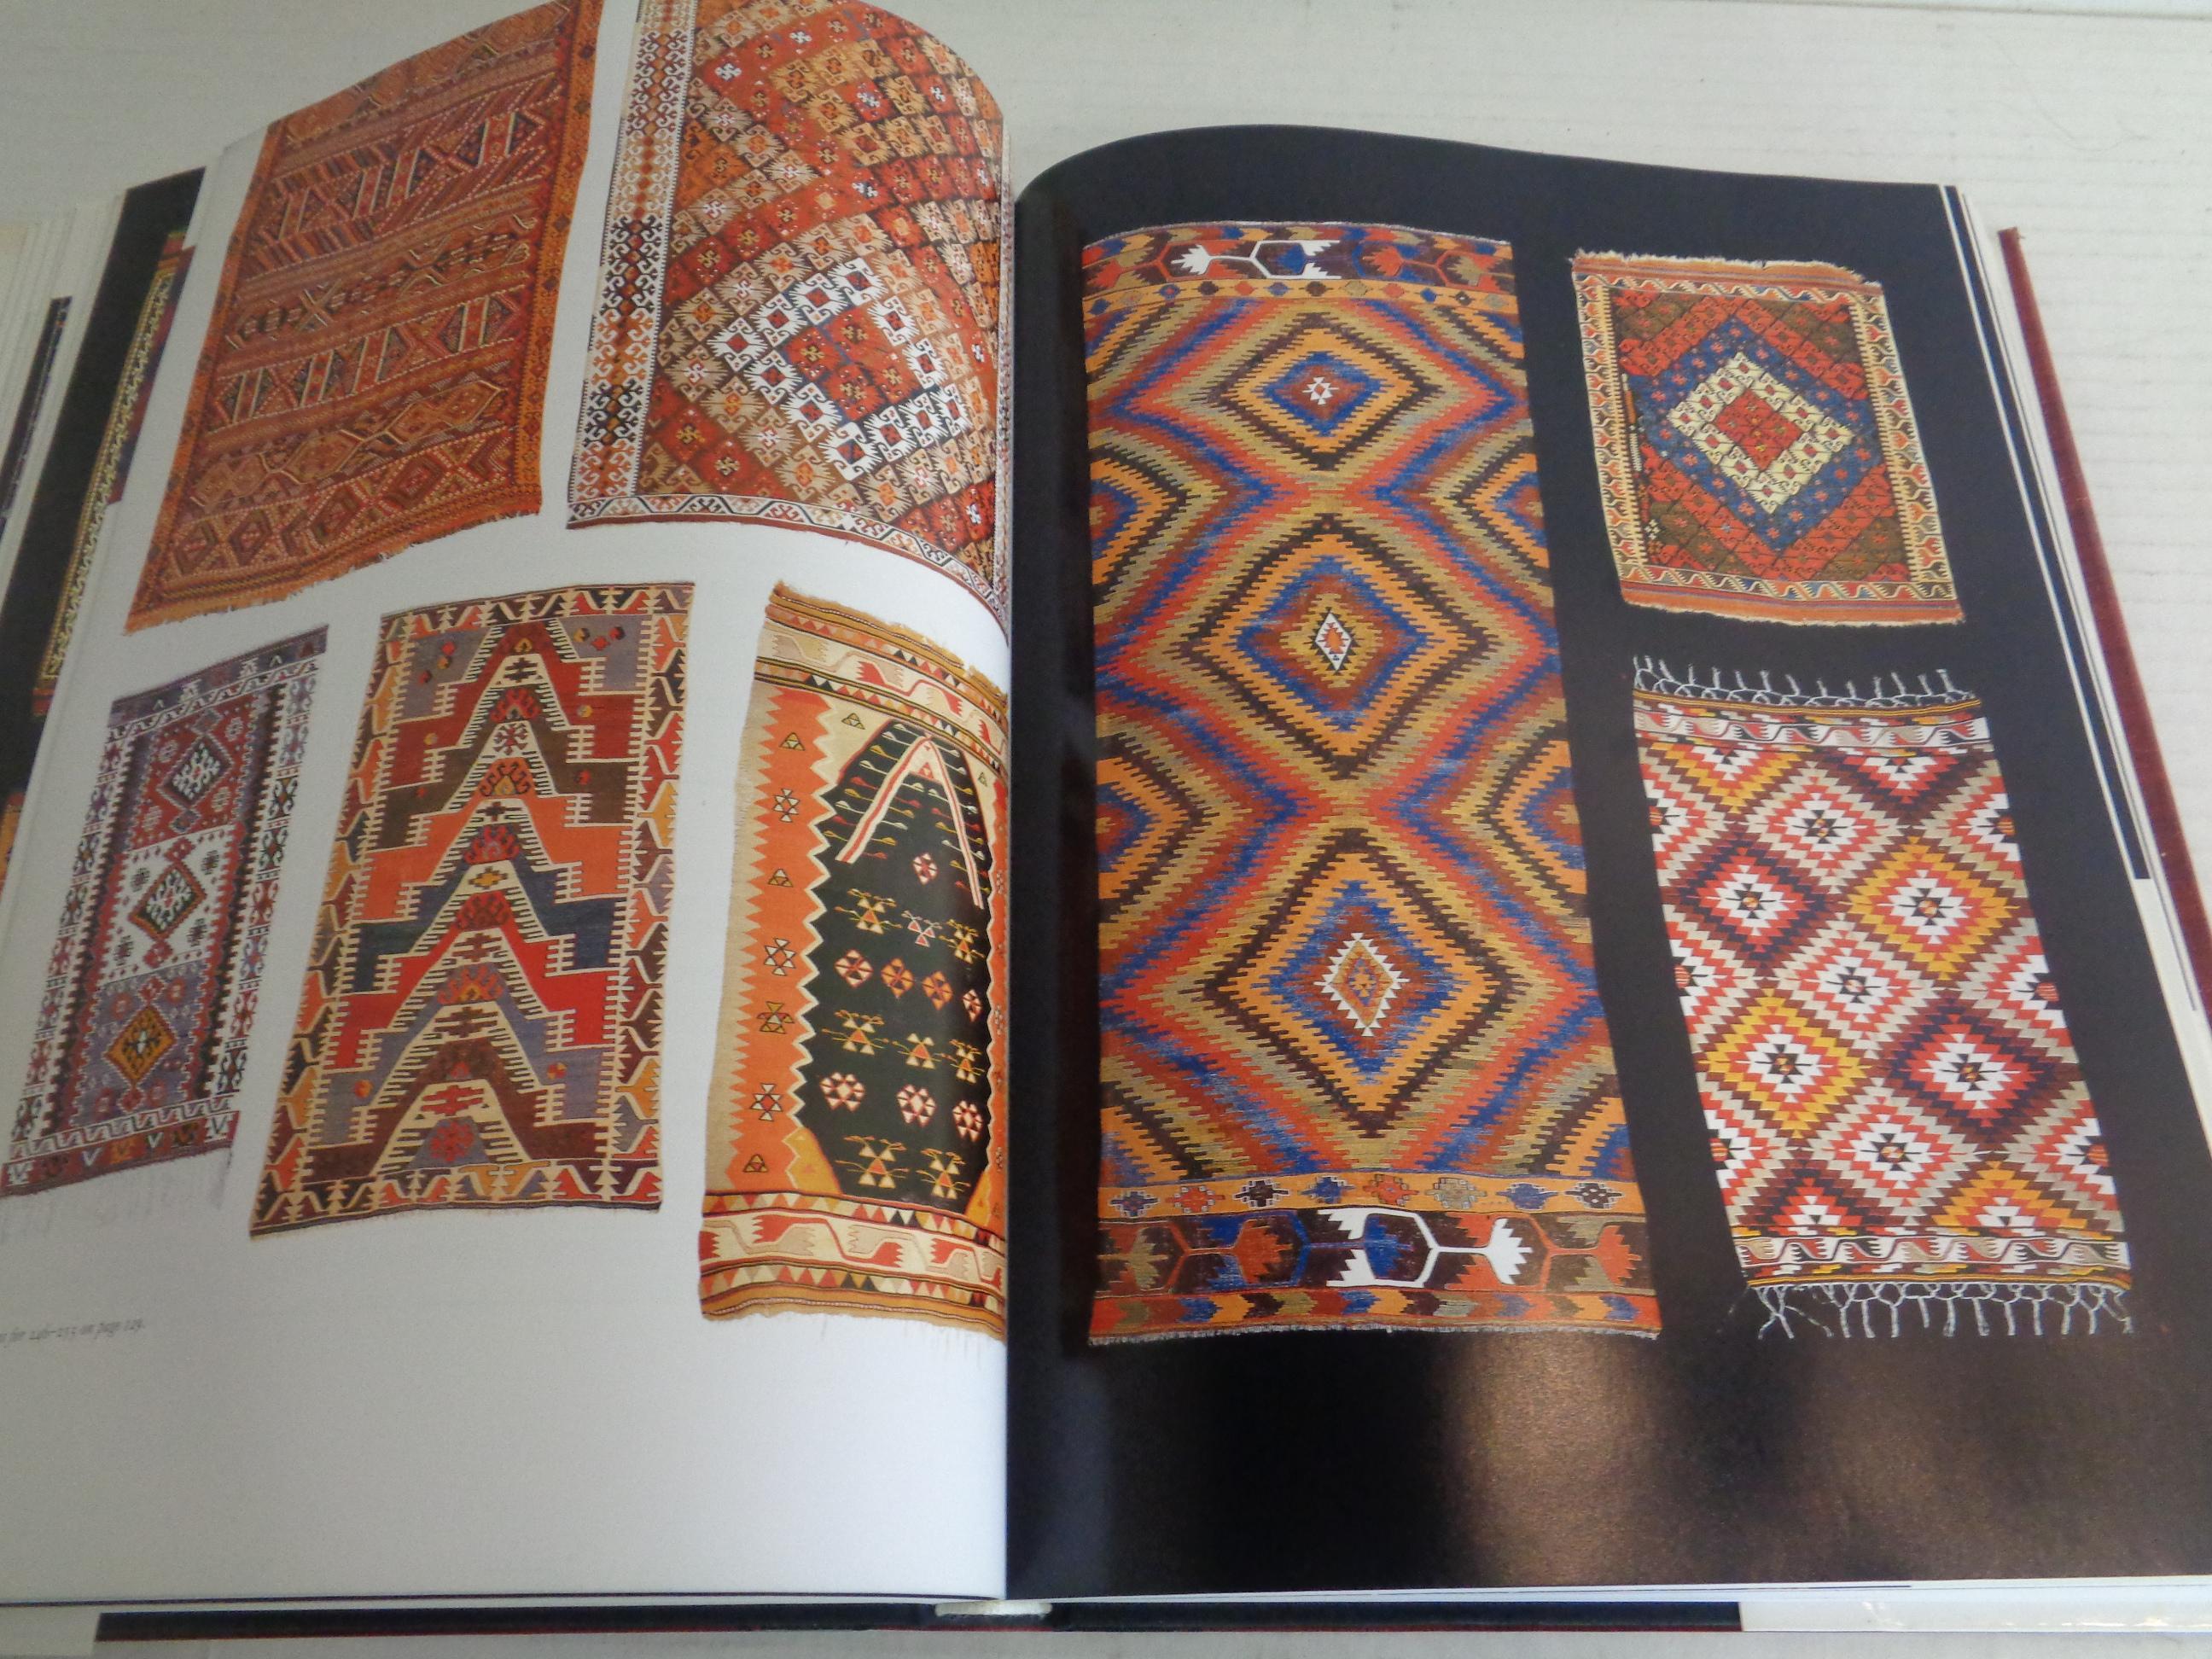 KILIM: The Complete Guide - 1993 Chronicle Books - 1st Edition For Sale 6